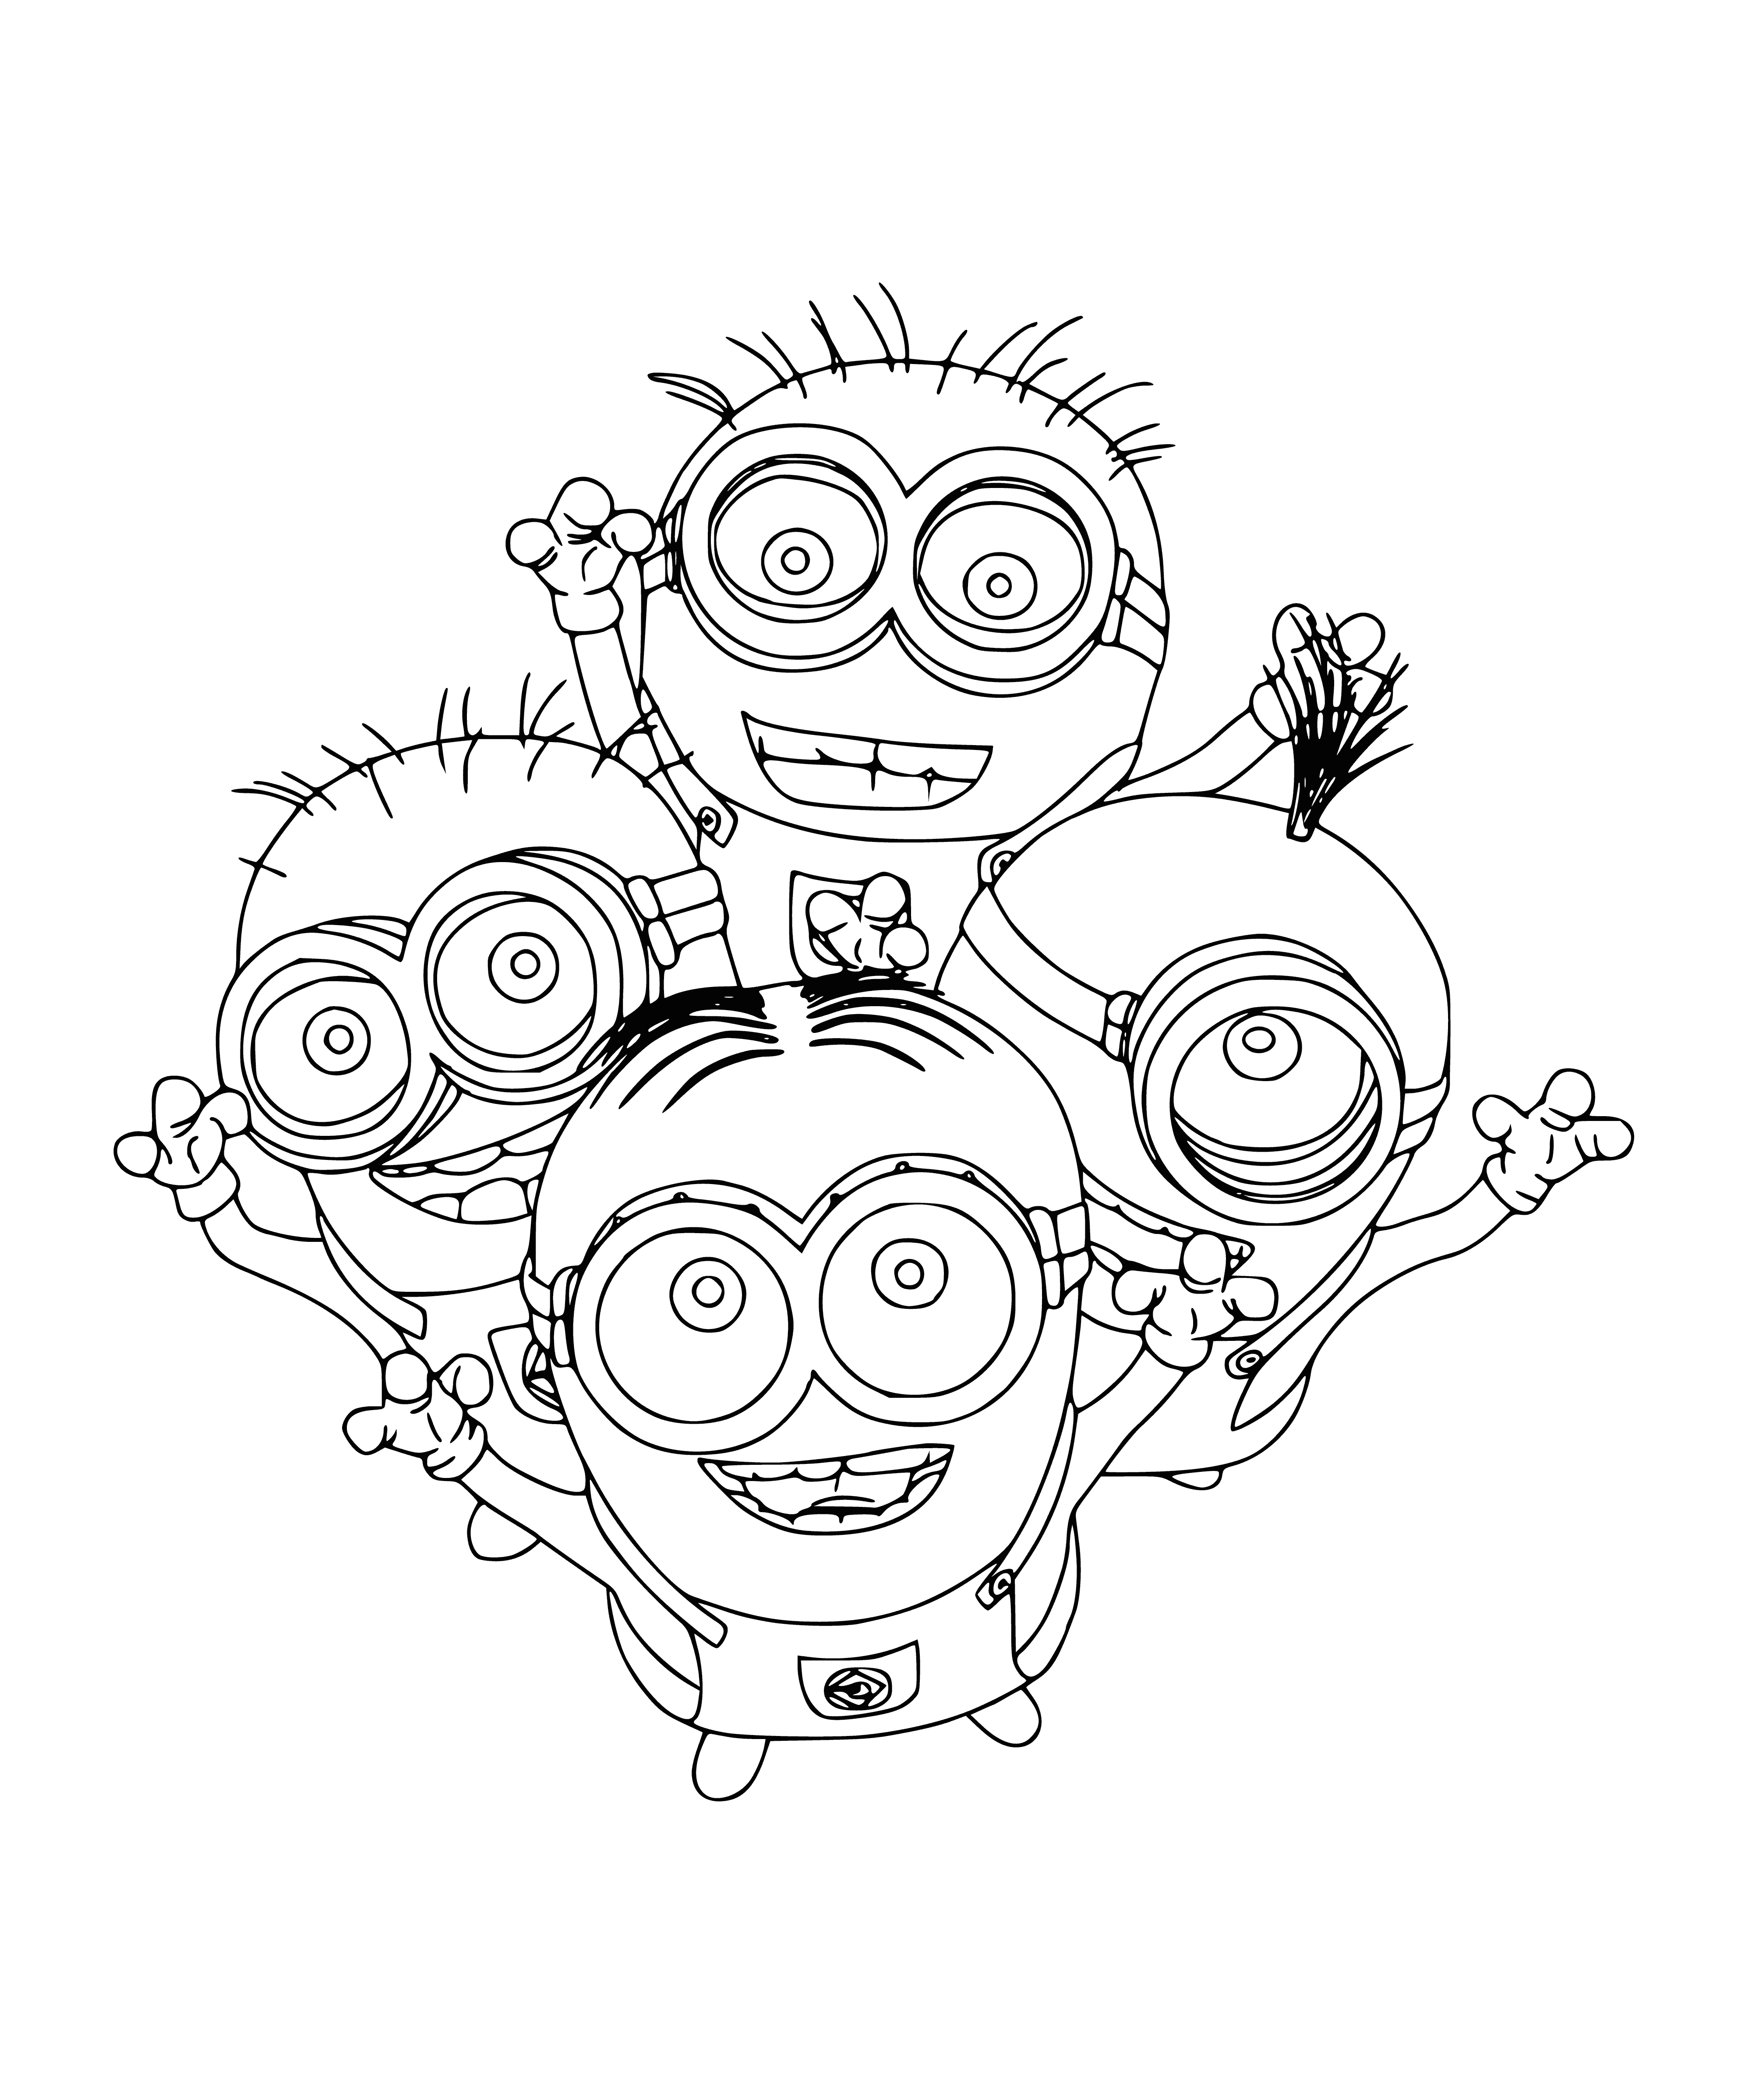 coloring page: Minion Mignon waves hello, holding a cupcake and wearing a polka dot dress and apron, with two braids. #MinionMignon